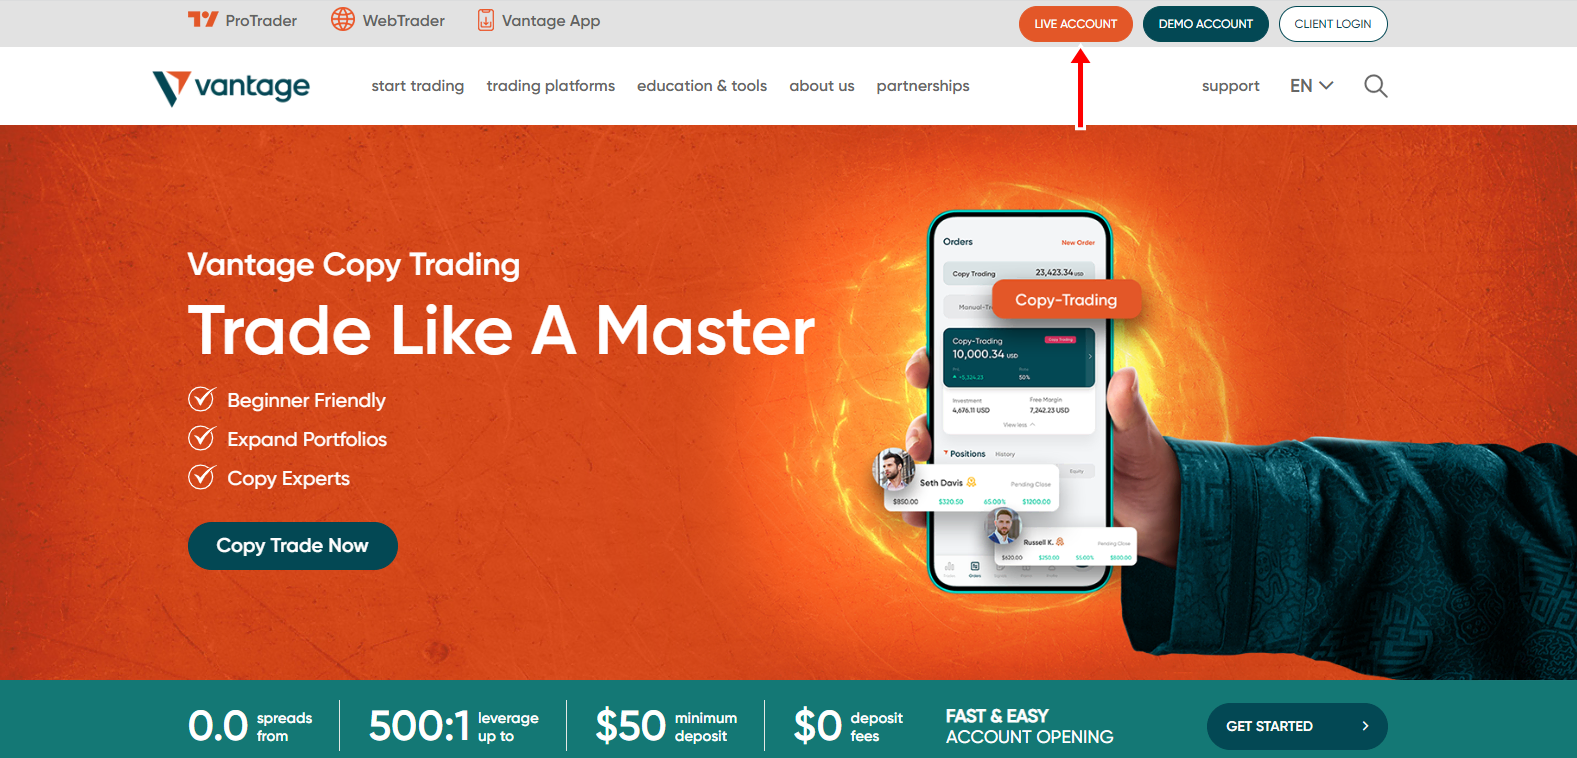 Vantage Markets - how to open a new trading account?